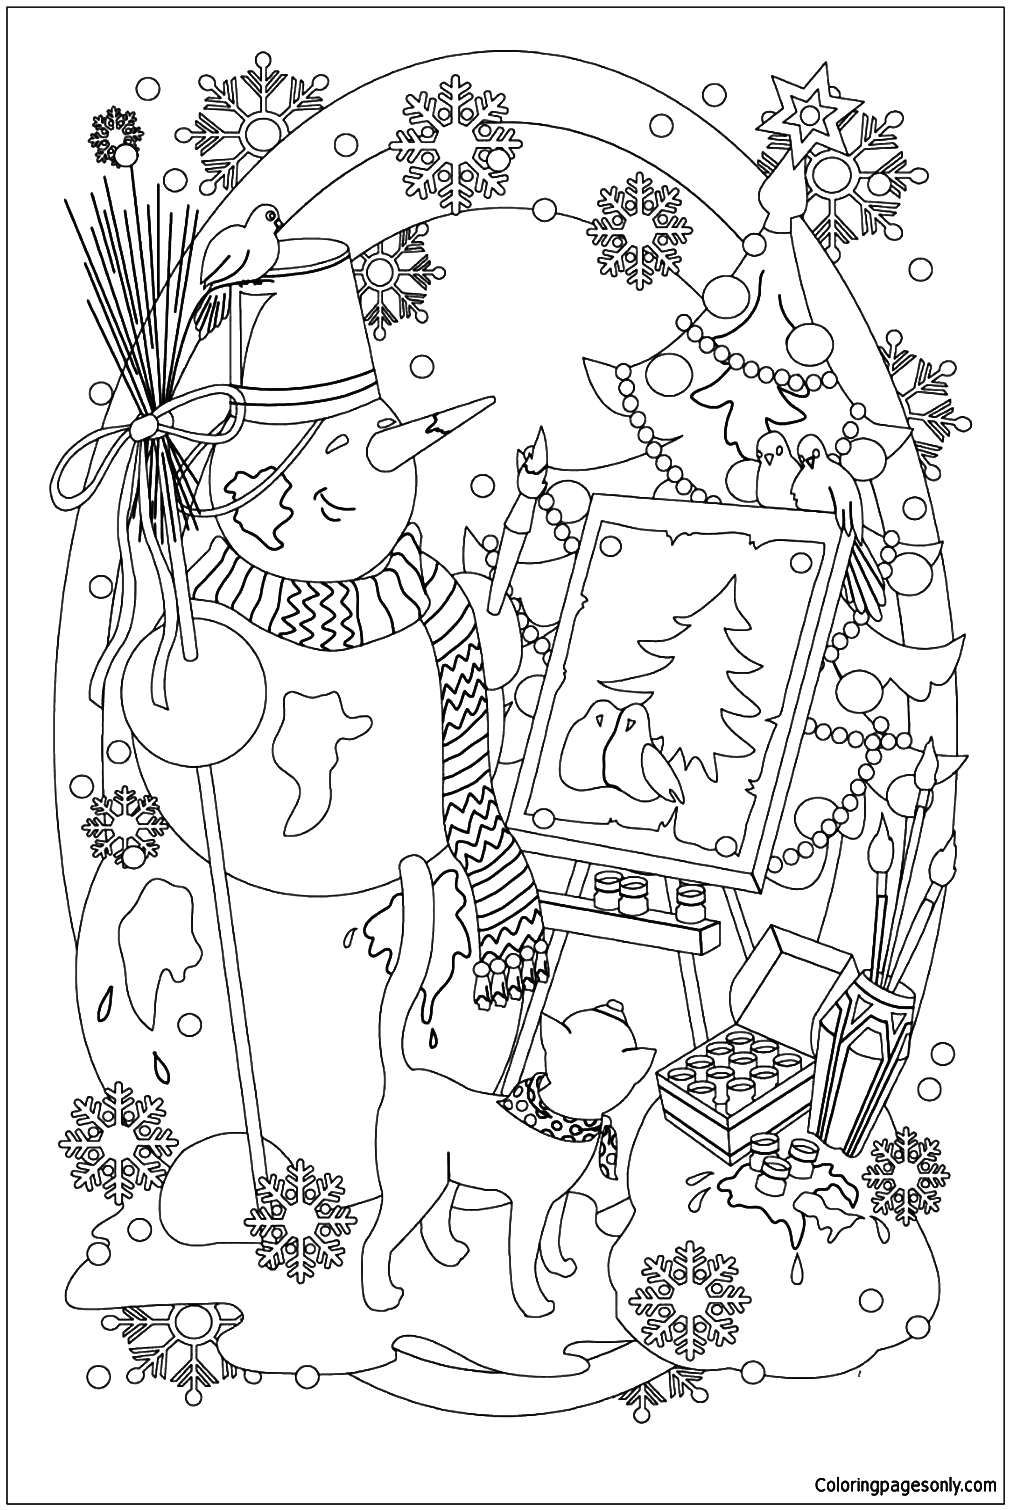 The Snowman Is Painting A Picture Coloring Pages